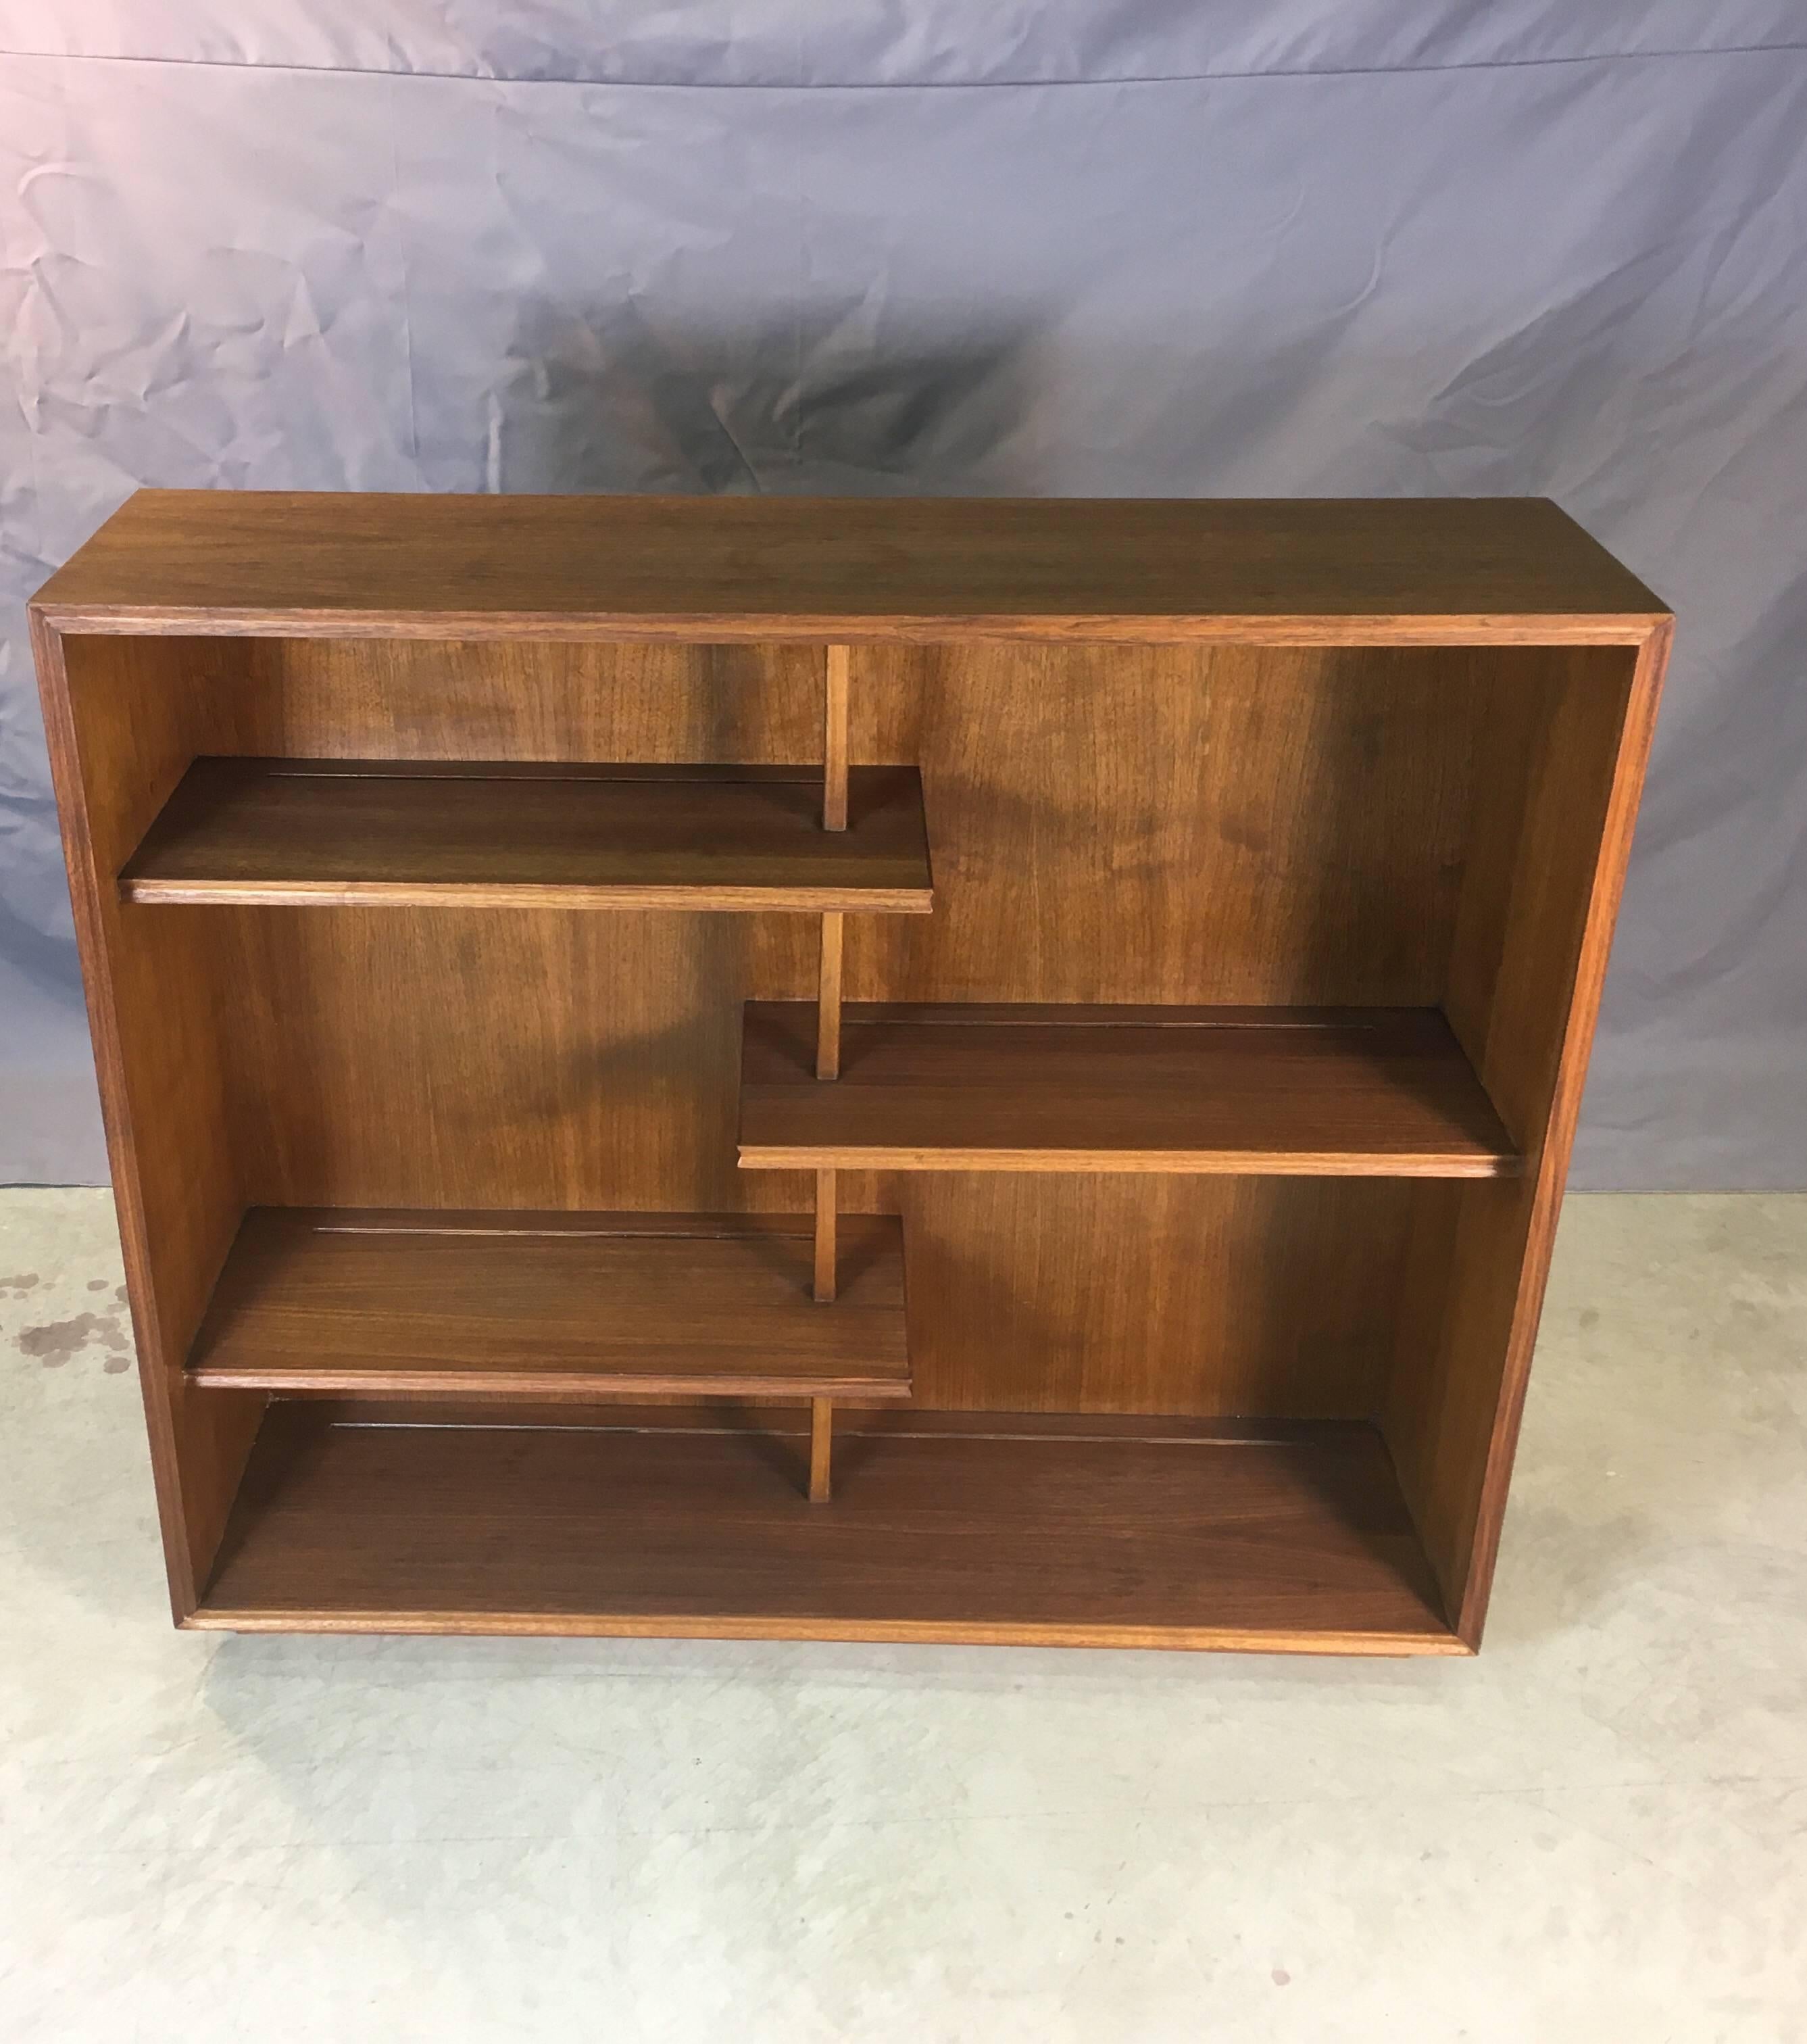 Vintage mid-20th century walnut wood shelving unit or bookcase. The shelving has grooves to display plates. Fully restored. Unmarked. Shelves are not adjustable.